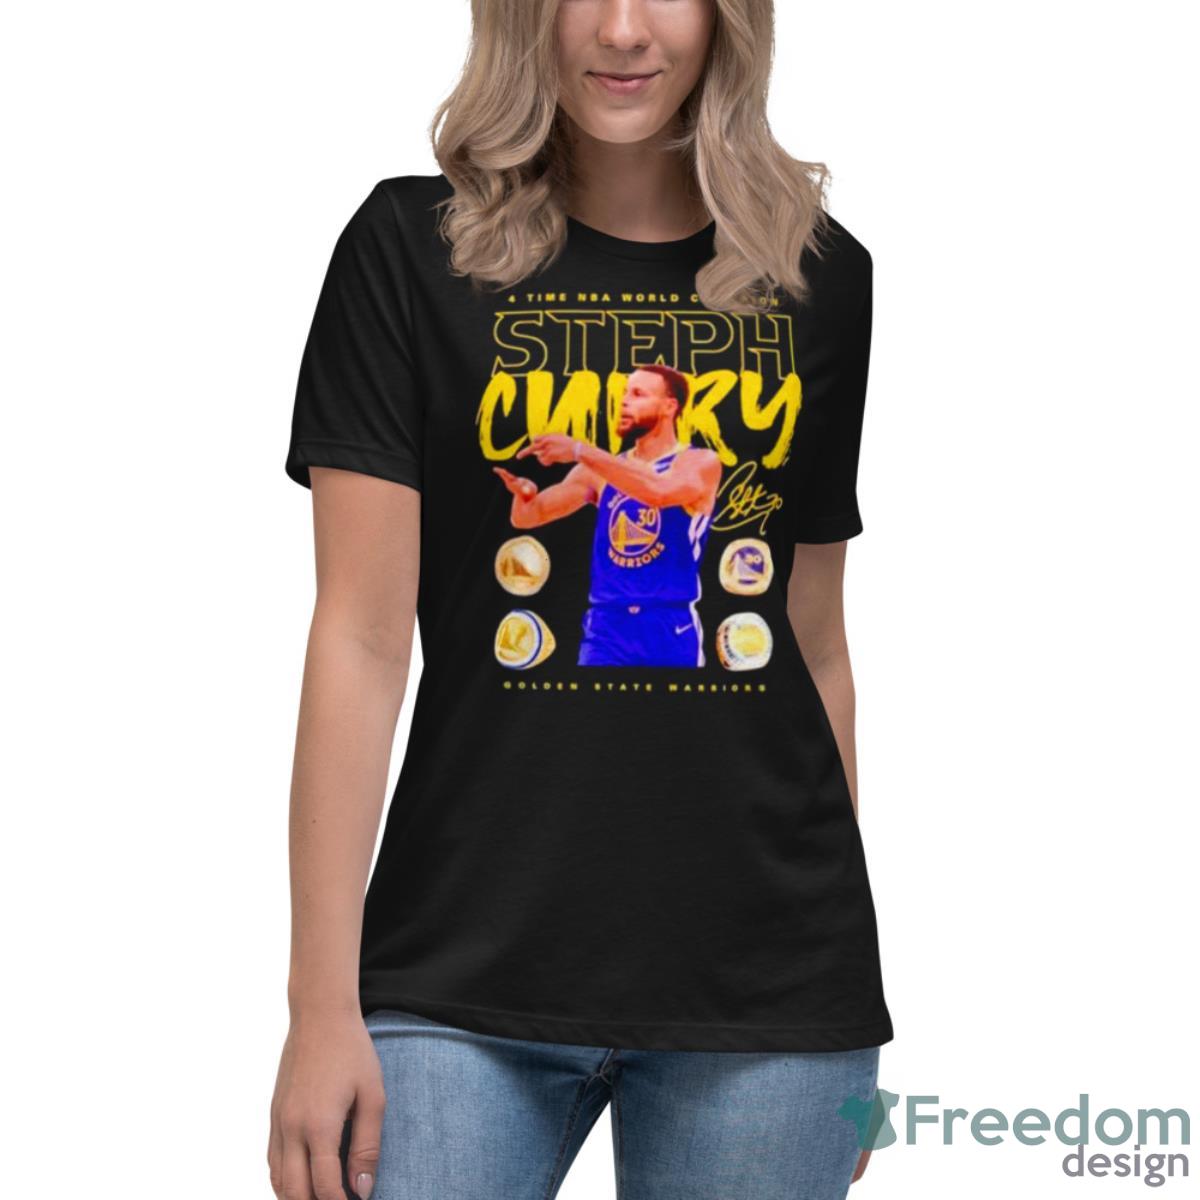 Steph Curry Golden State Warriors 4 Time Nba World Champion Rings Shirt